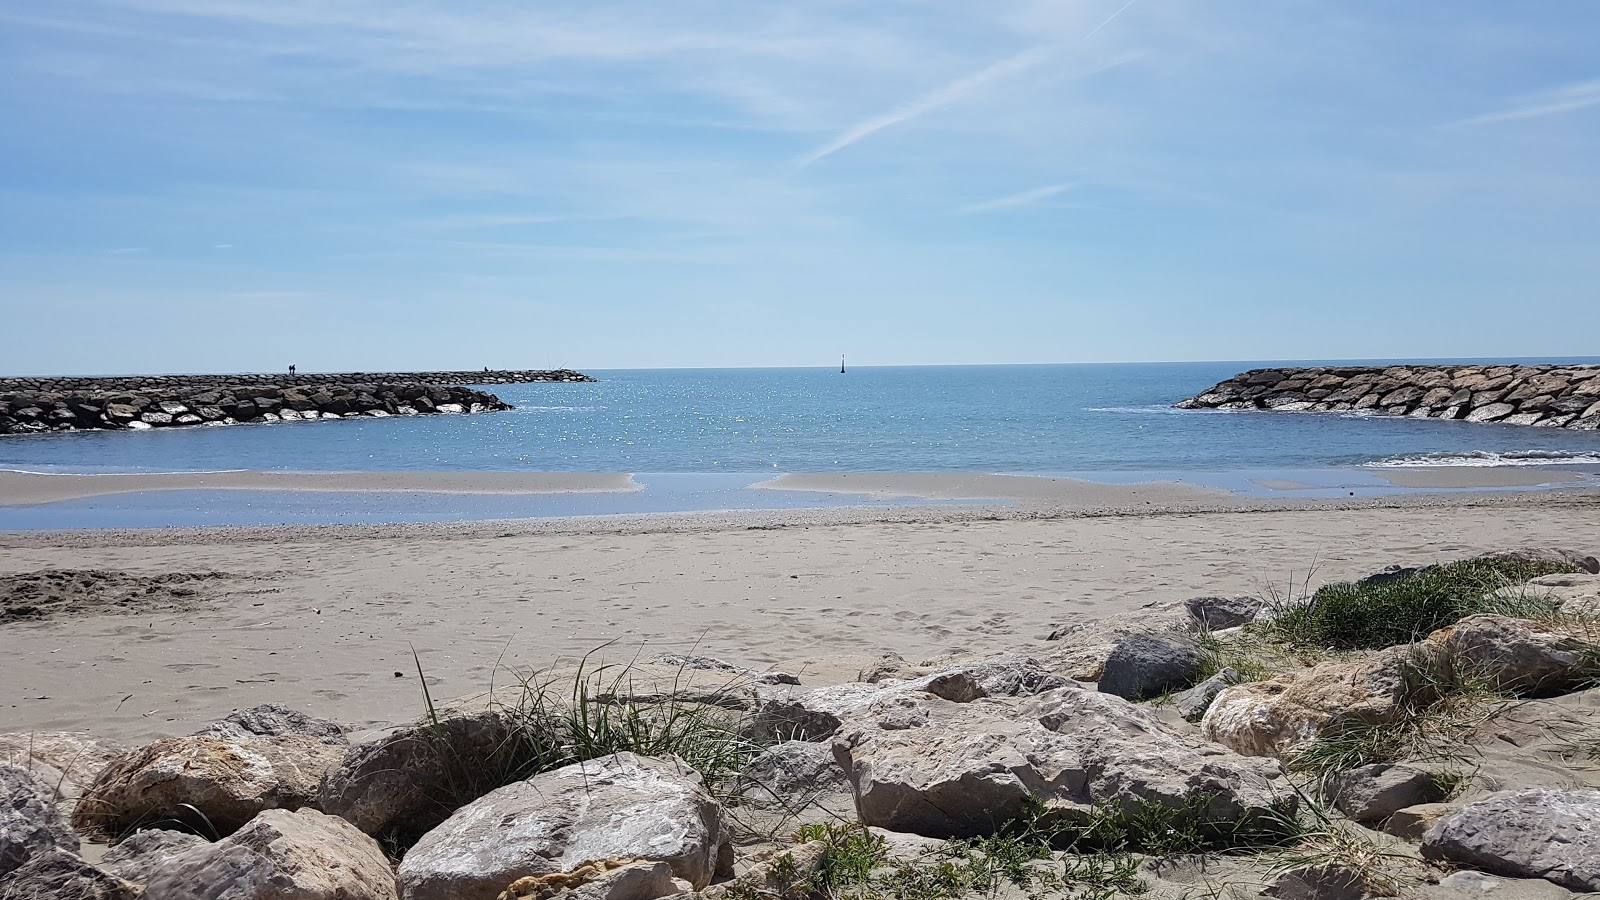 Photo of Le Grau-du-Roi beach with turquoise water surface